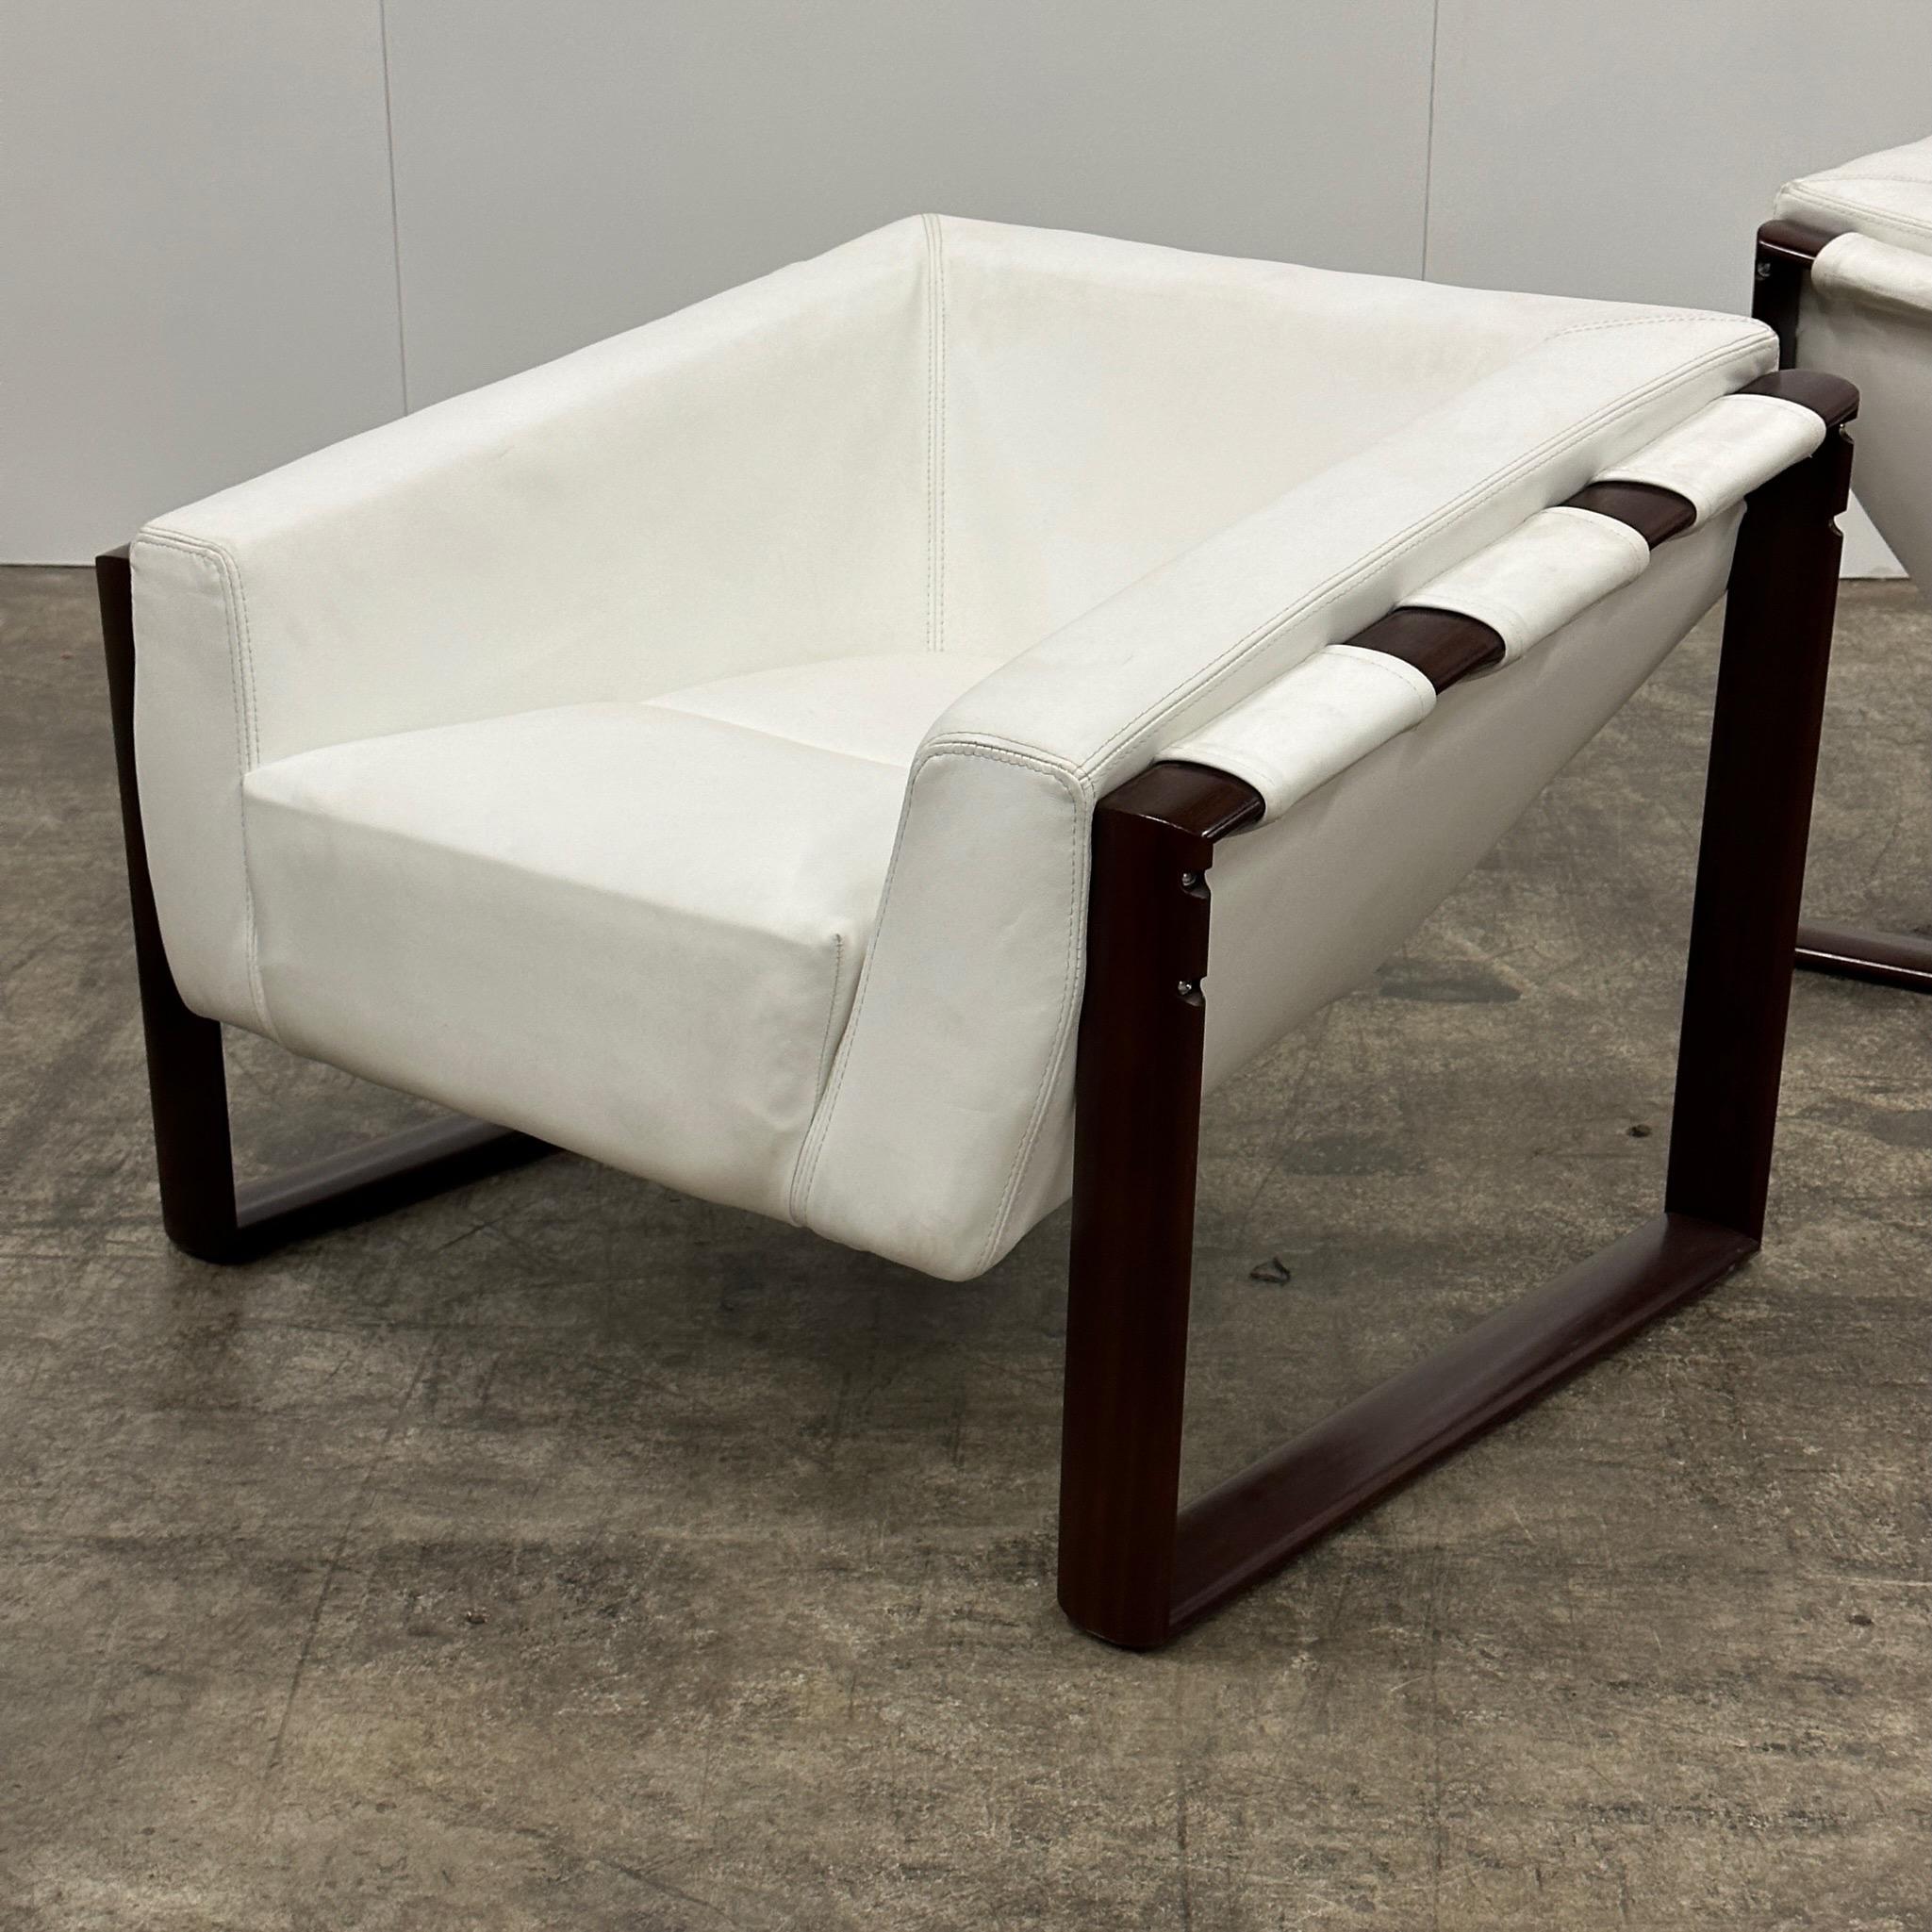 c. 1960s. Previously reupholstered in white leather. Rosewood frames. Foam is hard.

Price is for the set. Contact us if you’d like to purchase a single item.
